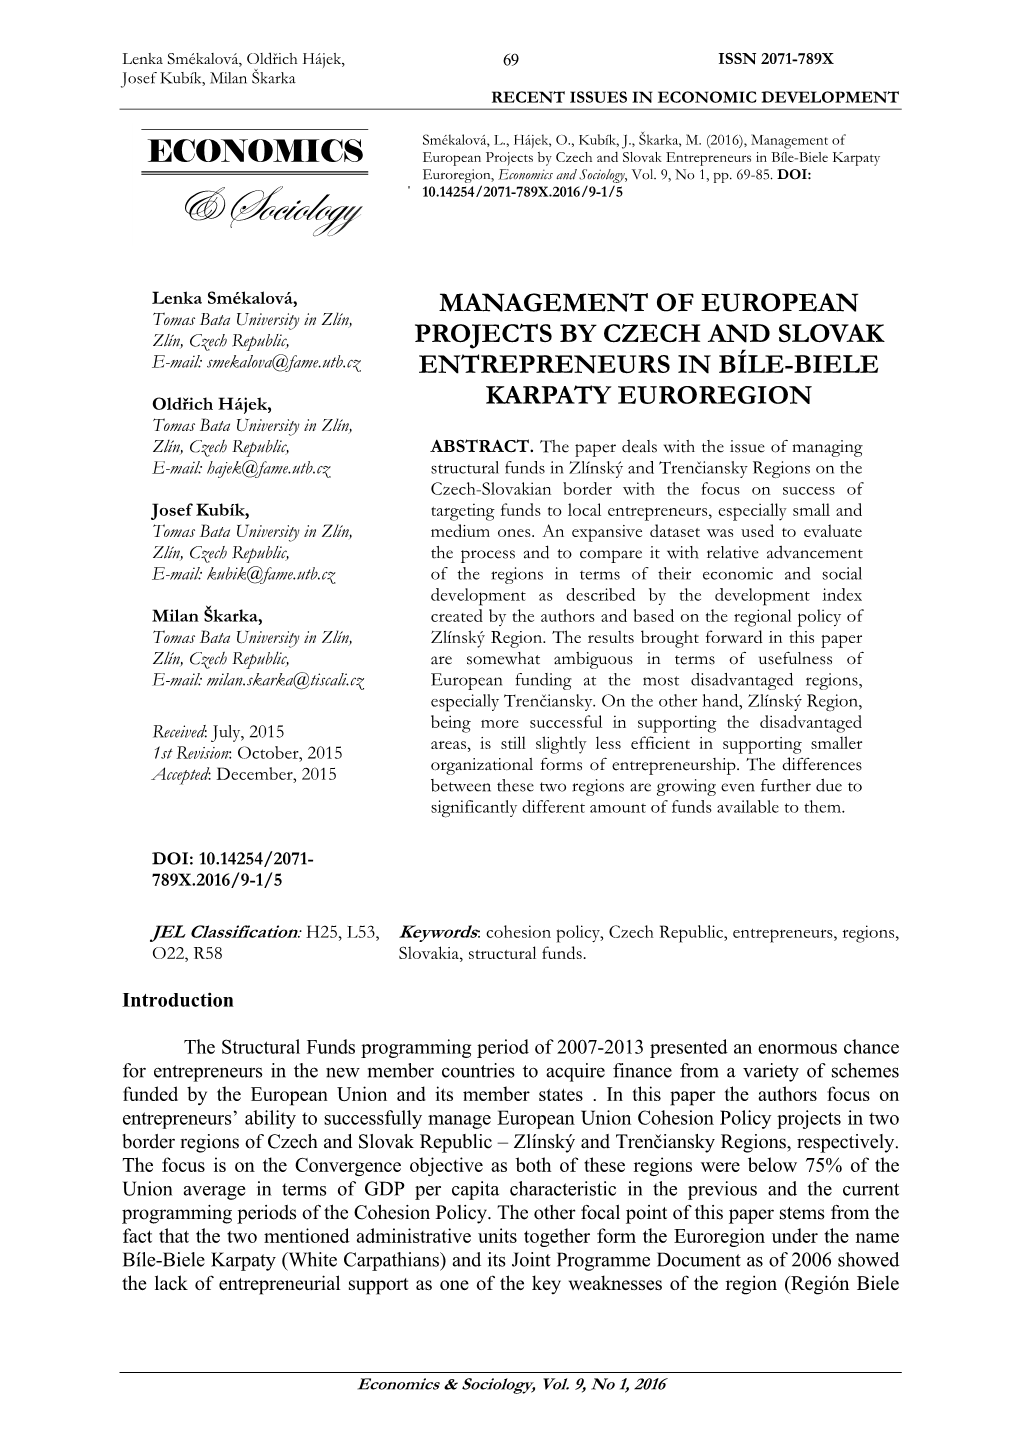 Management of European Projects by Czech and Slovak Entrepreneurs in Bíle-Biele Karpaty Euroregion, Economics and Sociology, Vol